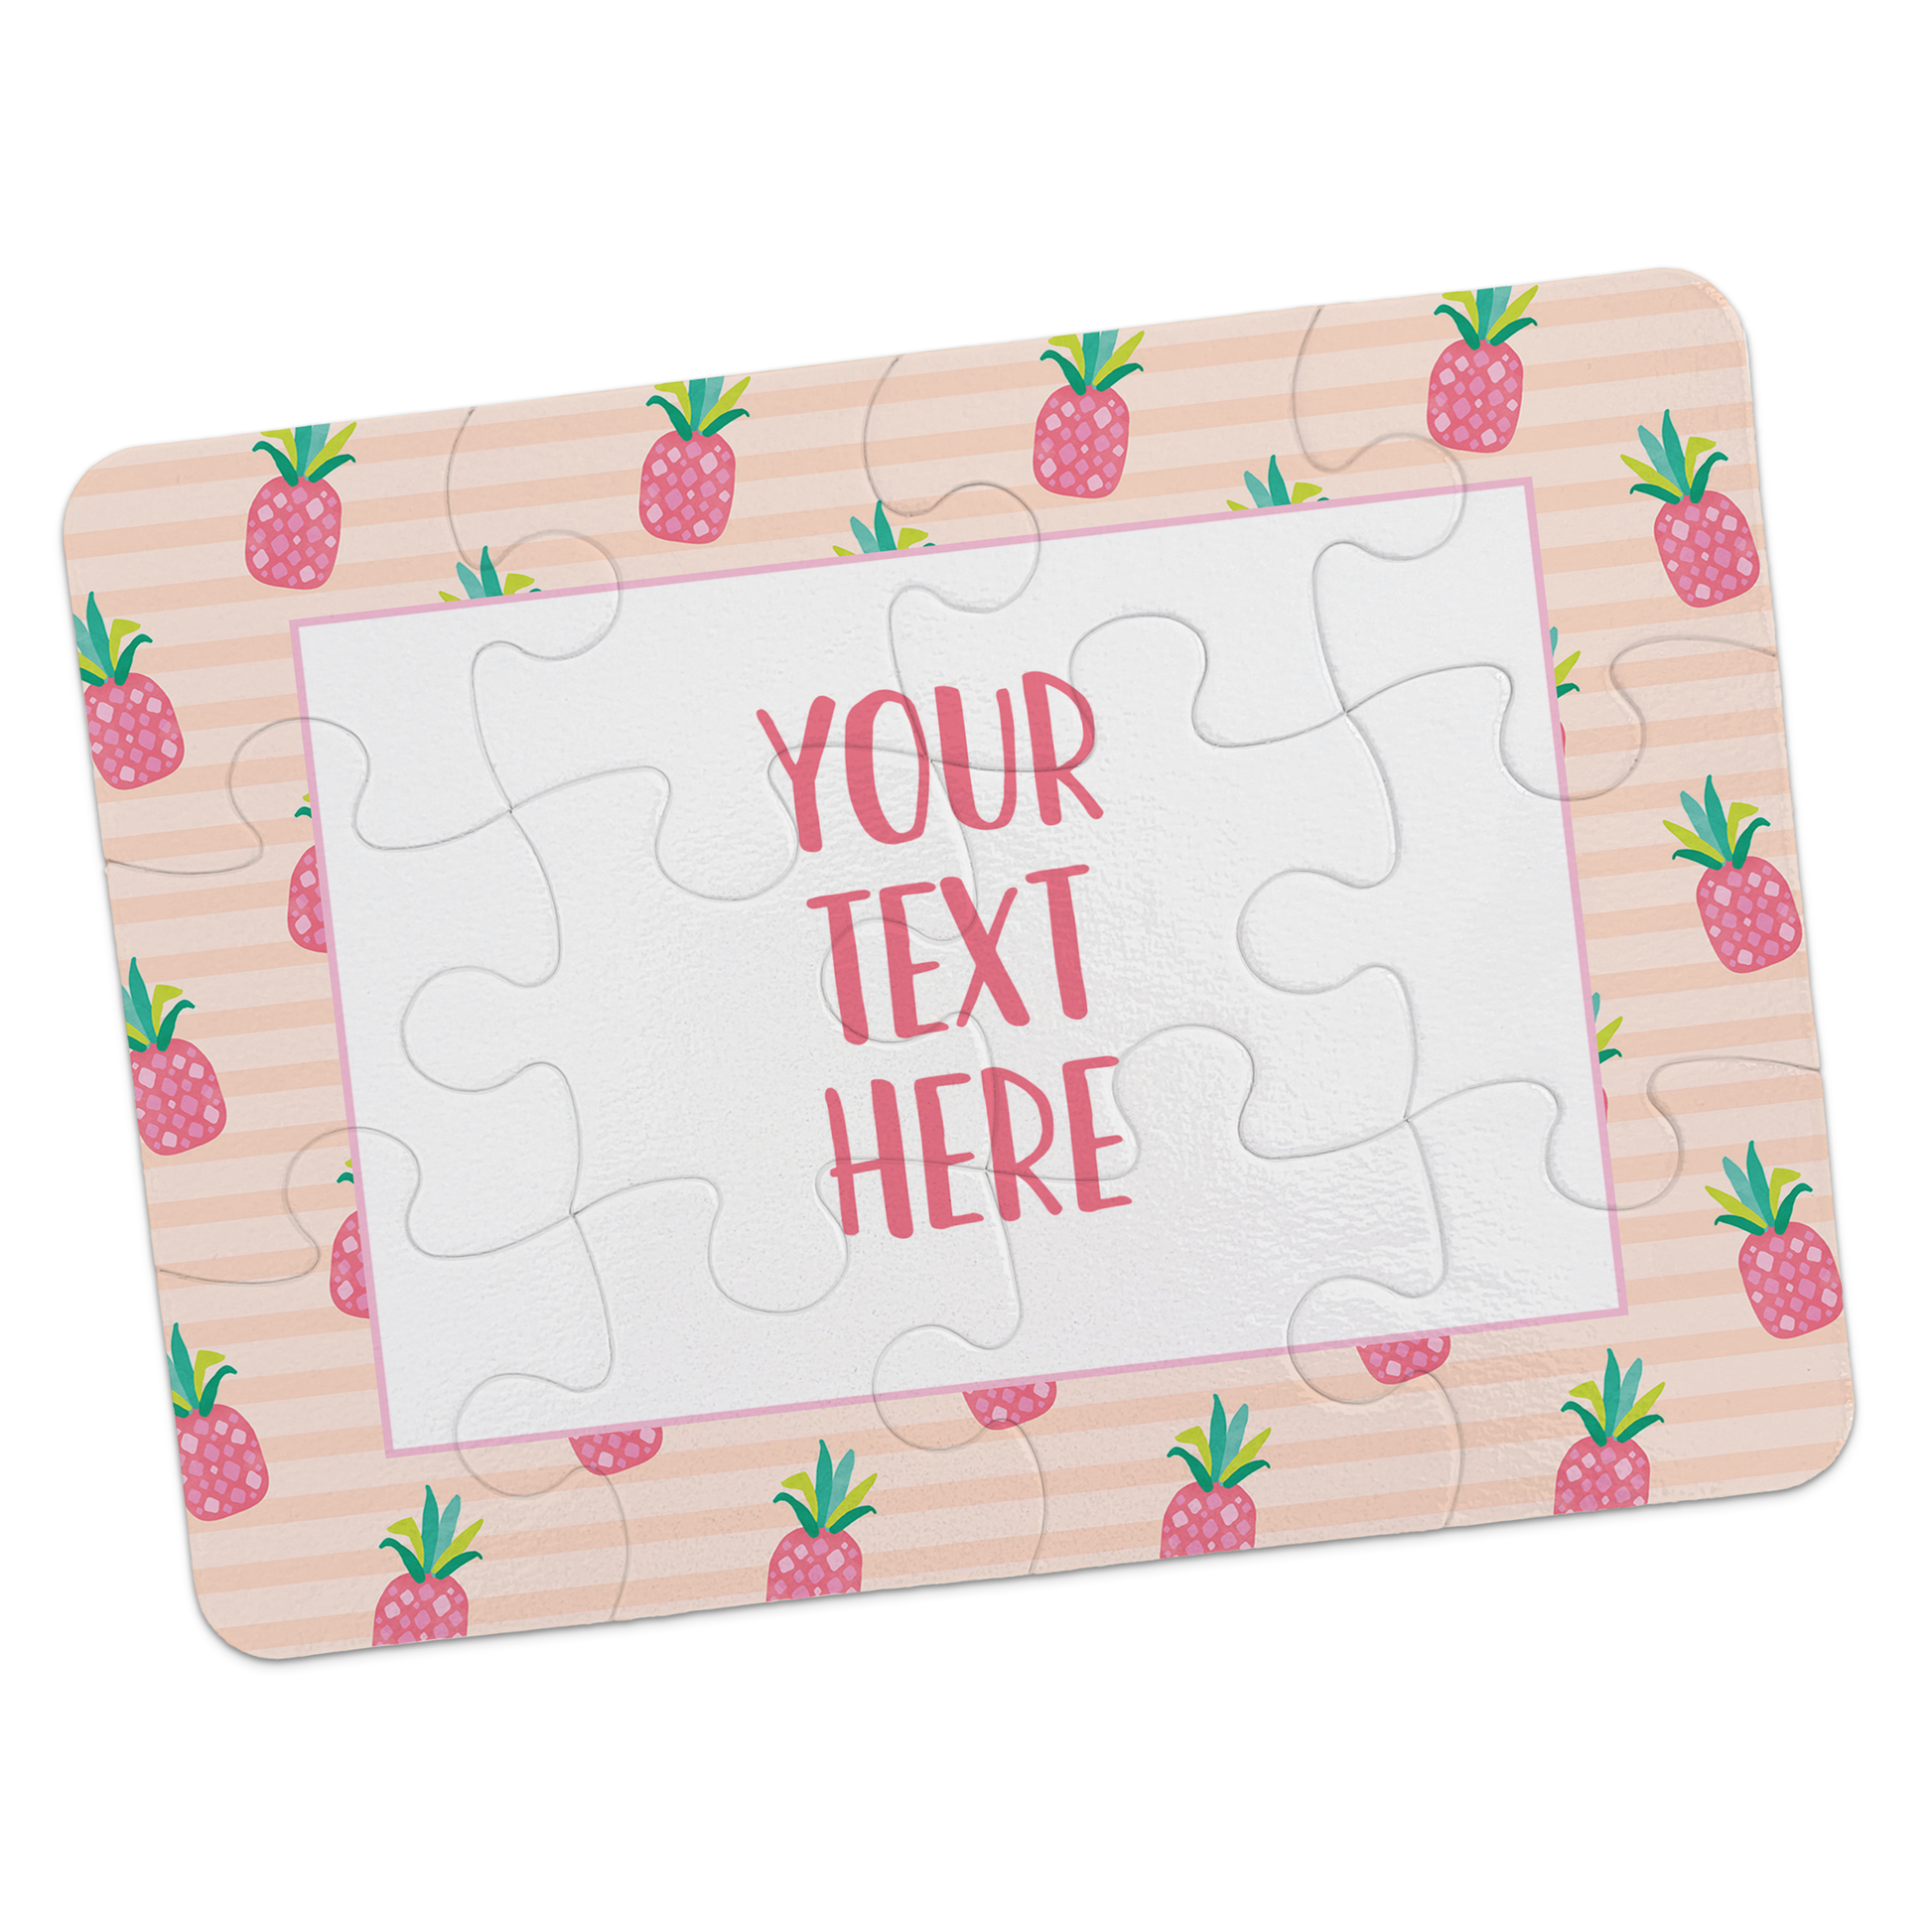 Create Your Own Puzzle - Pineapple Design - CYOP0266 | S'Berry Boutique